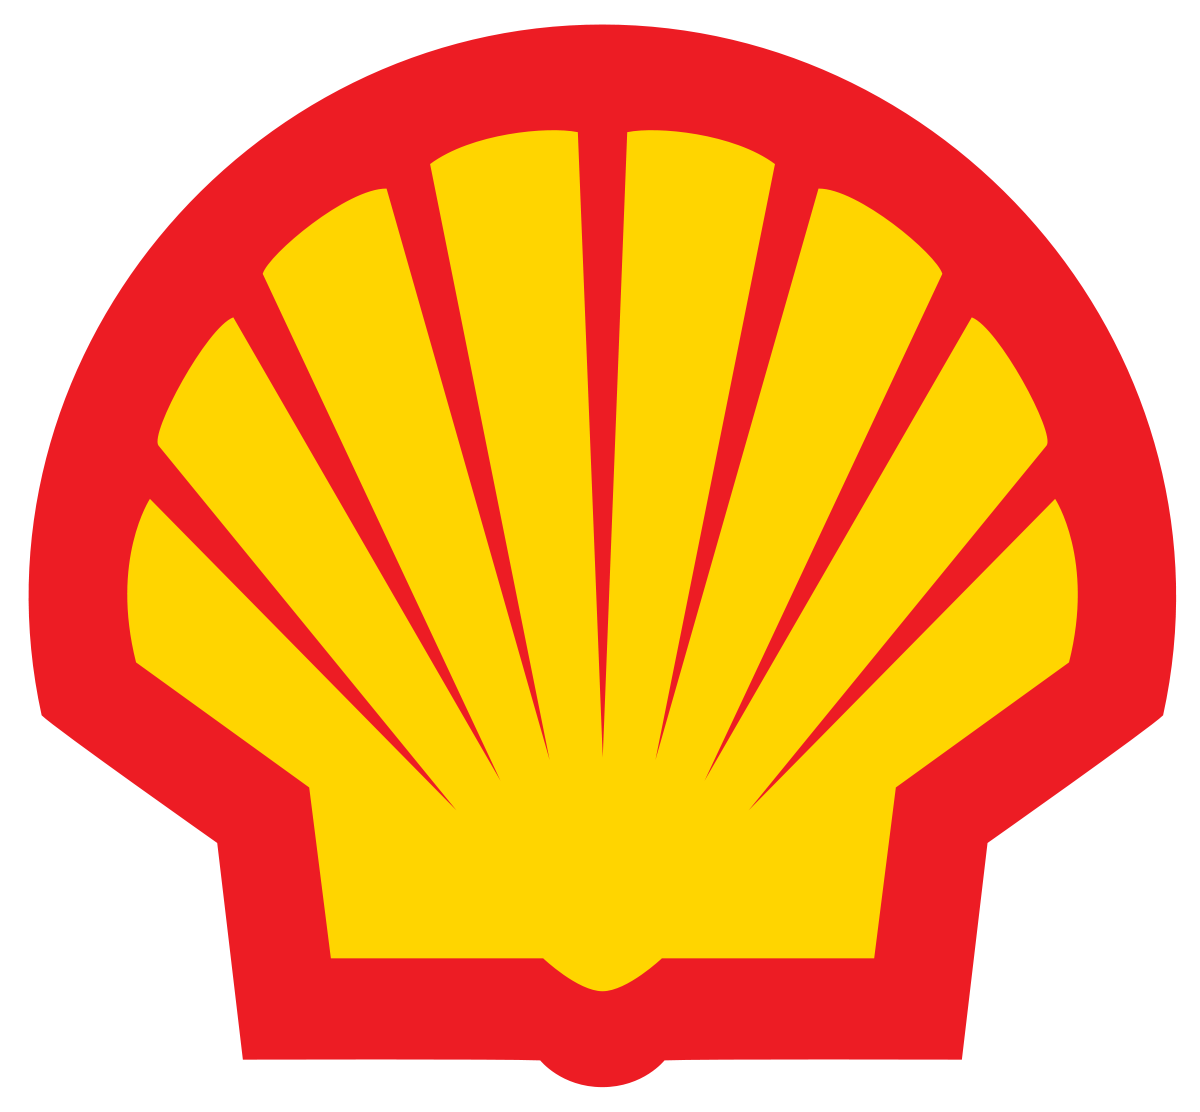 Court Summons Shell, Seven Others Over Alleged Illegal Metering System